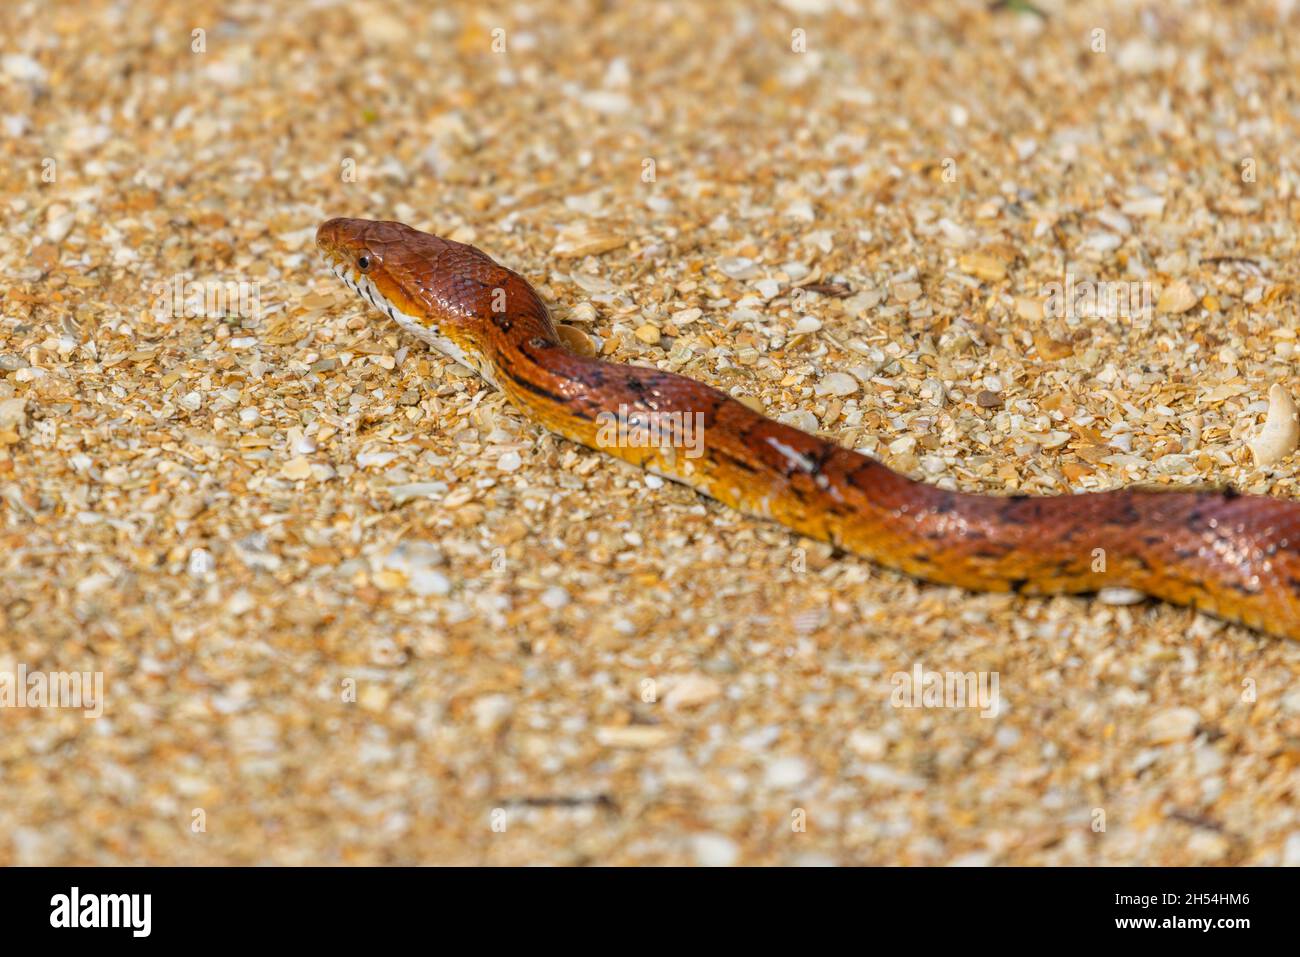 A corn snake (Pantherophis guttatus) lying on a sandy path in St. Augustine, Florida. Stock Photo